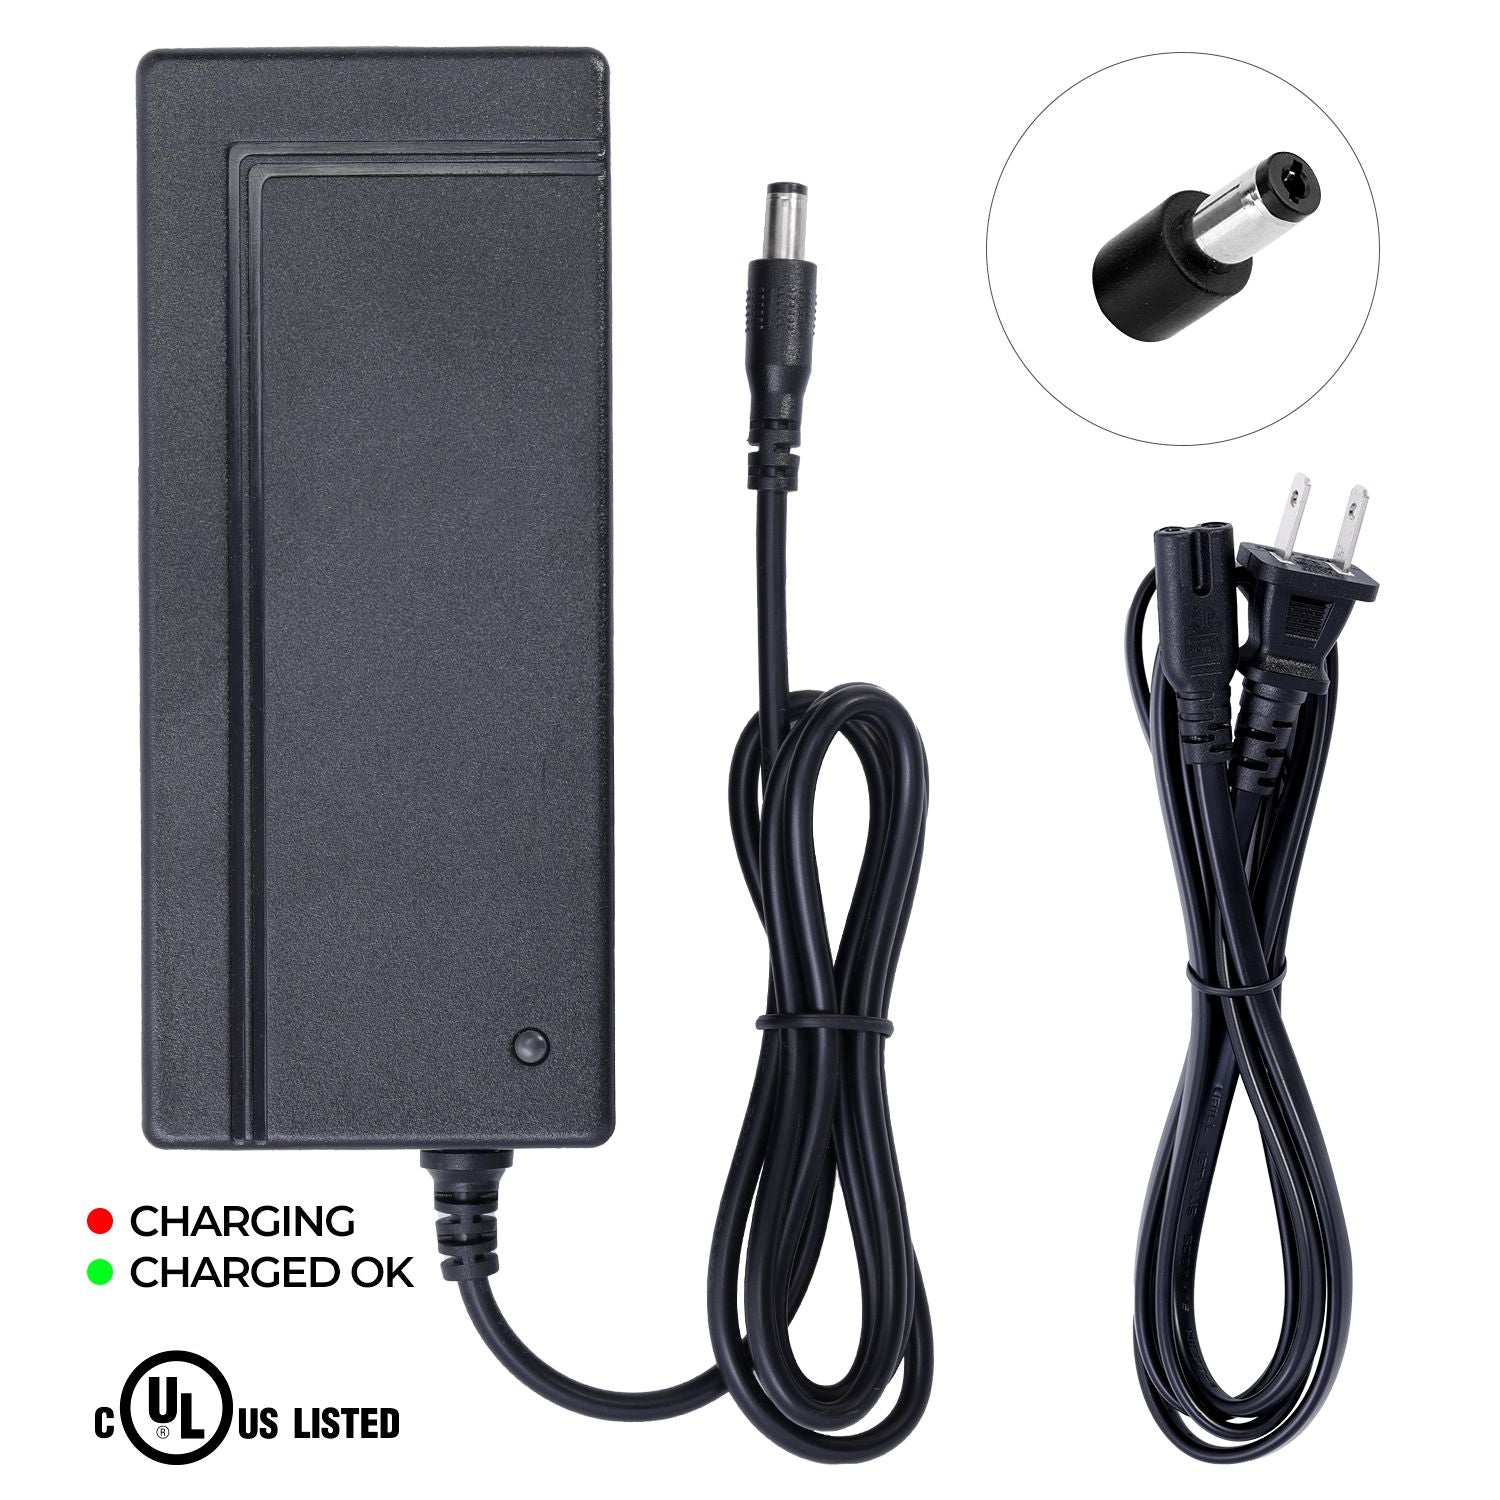 UL Certified Charger for Gotrax Apex Electric Scooter